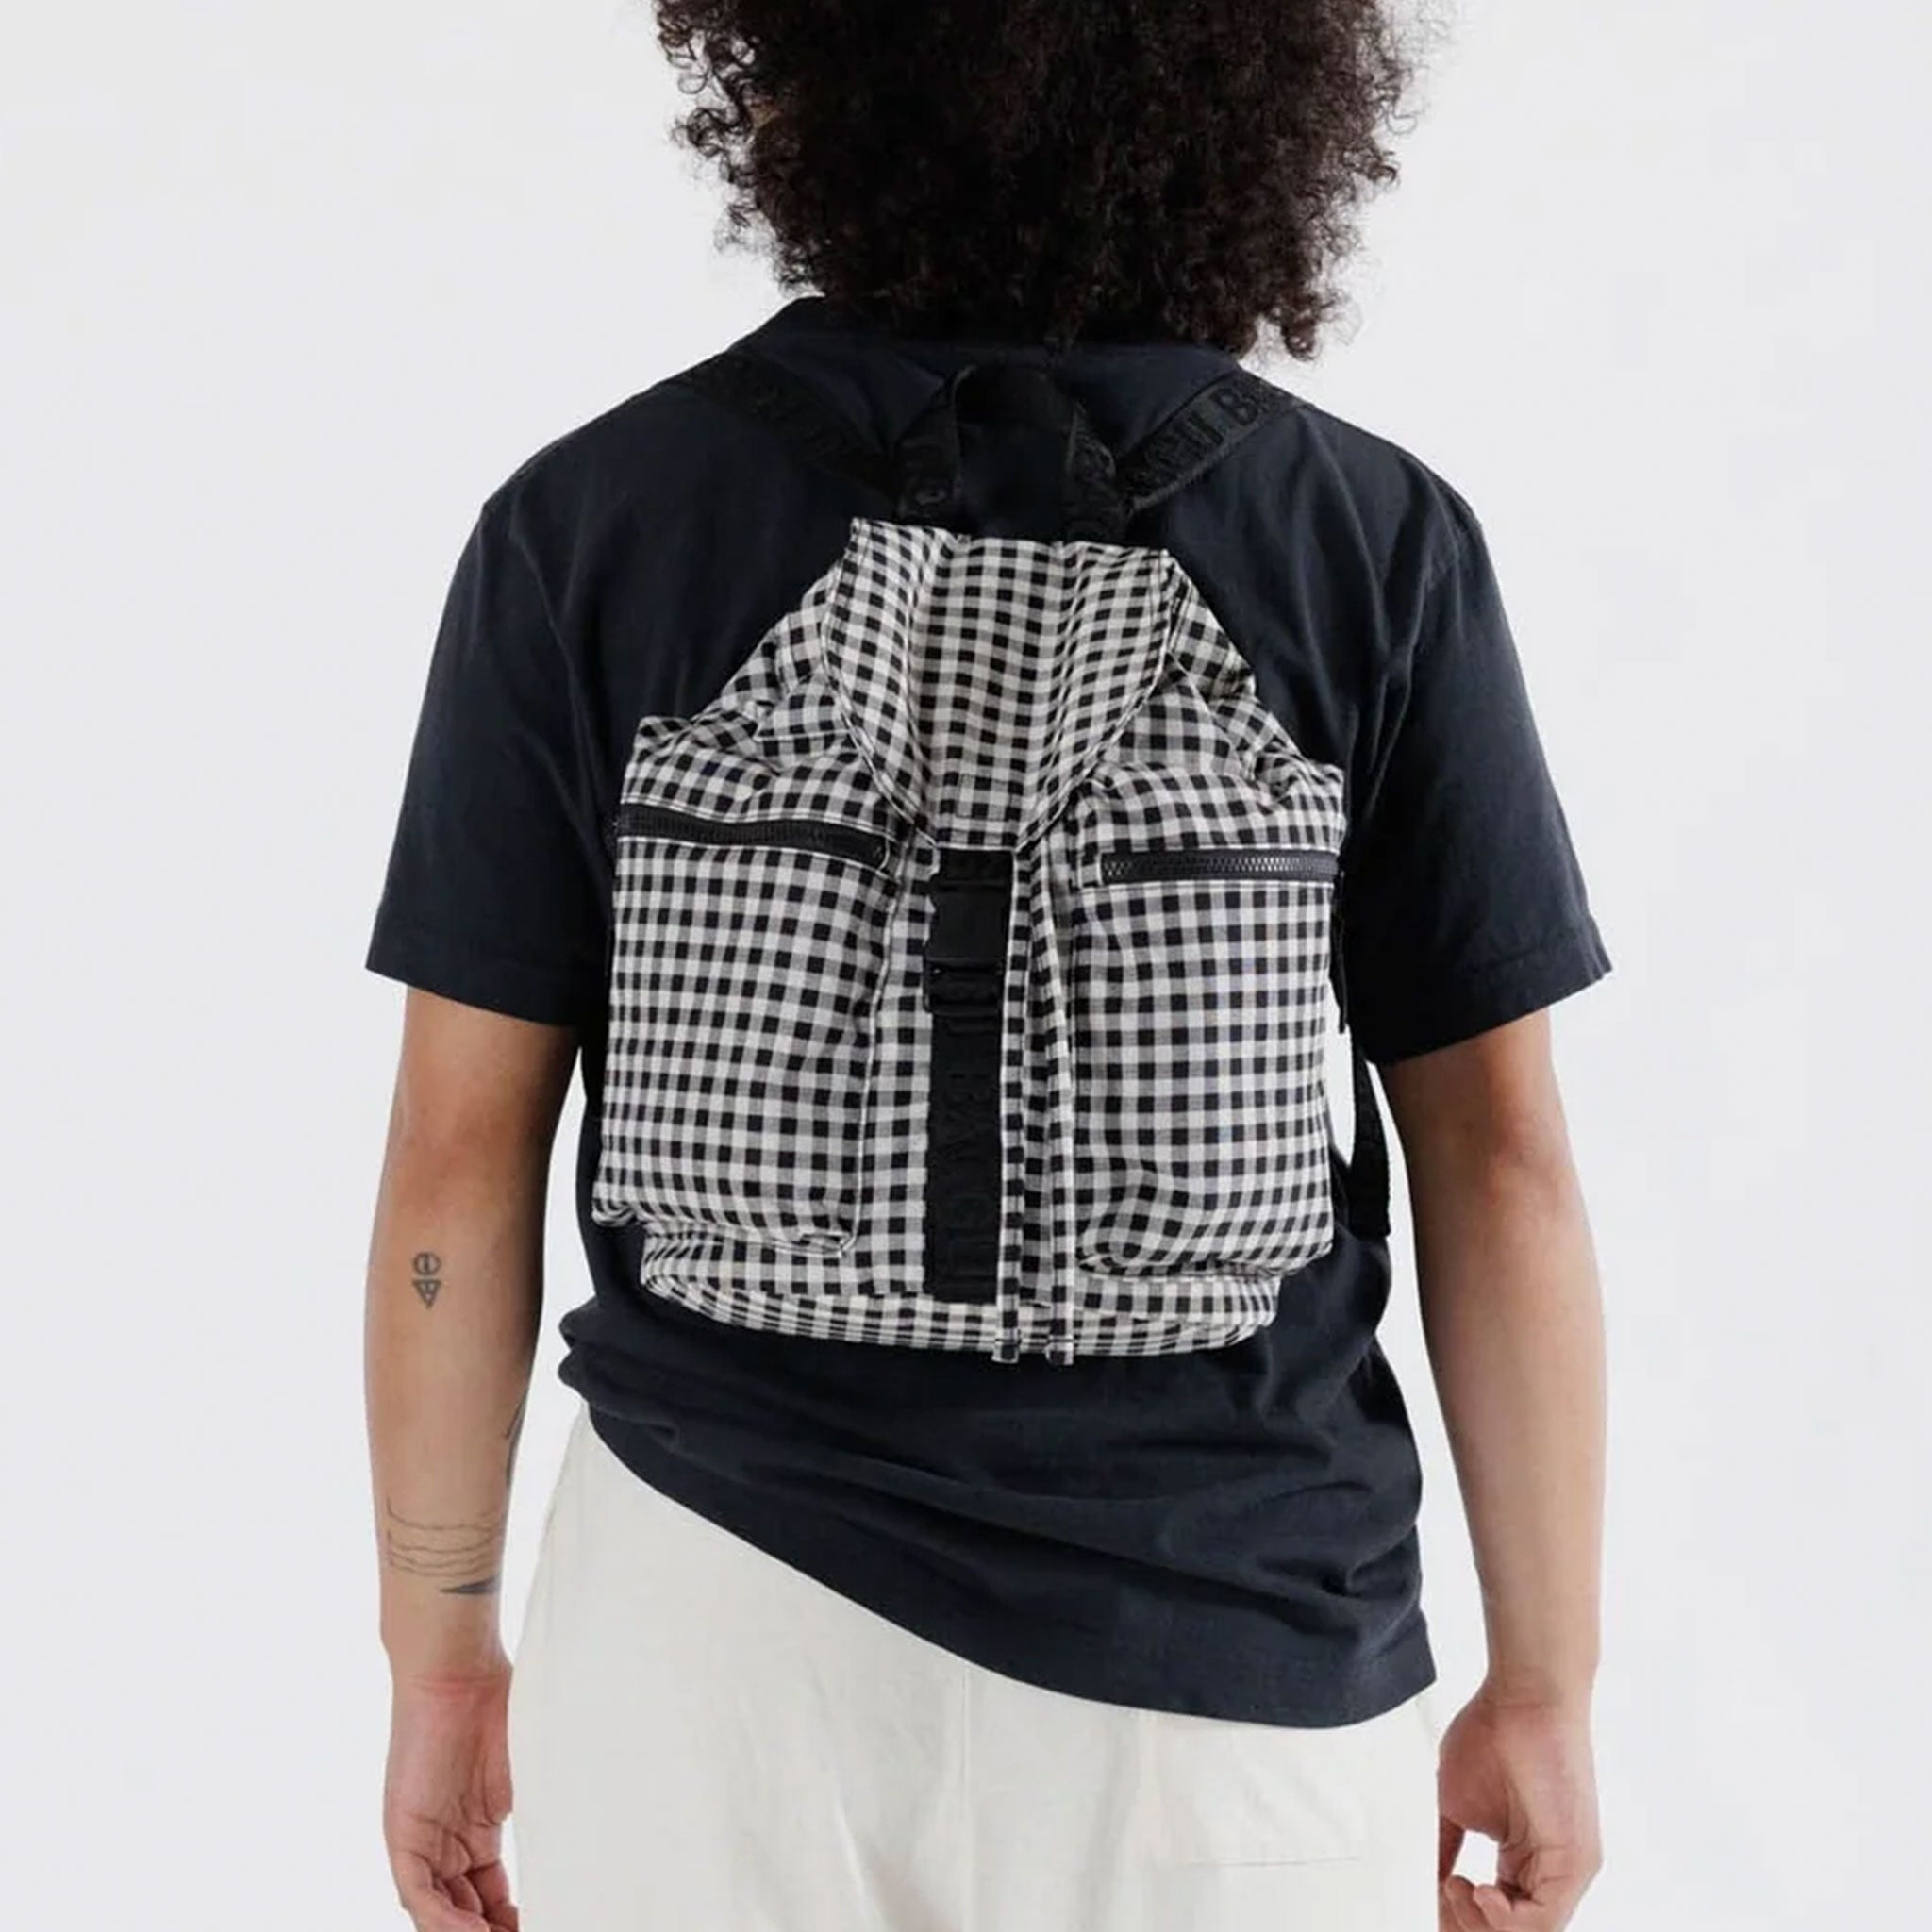 a black and white gingham backpack